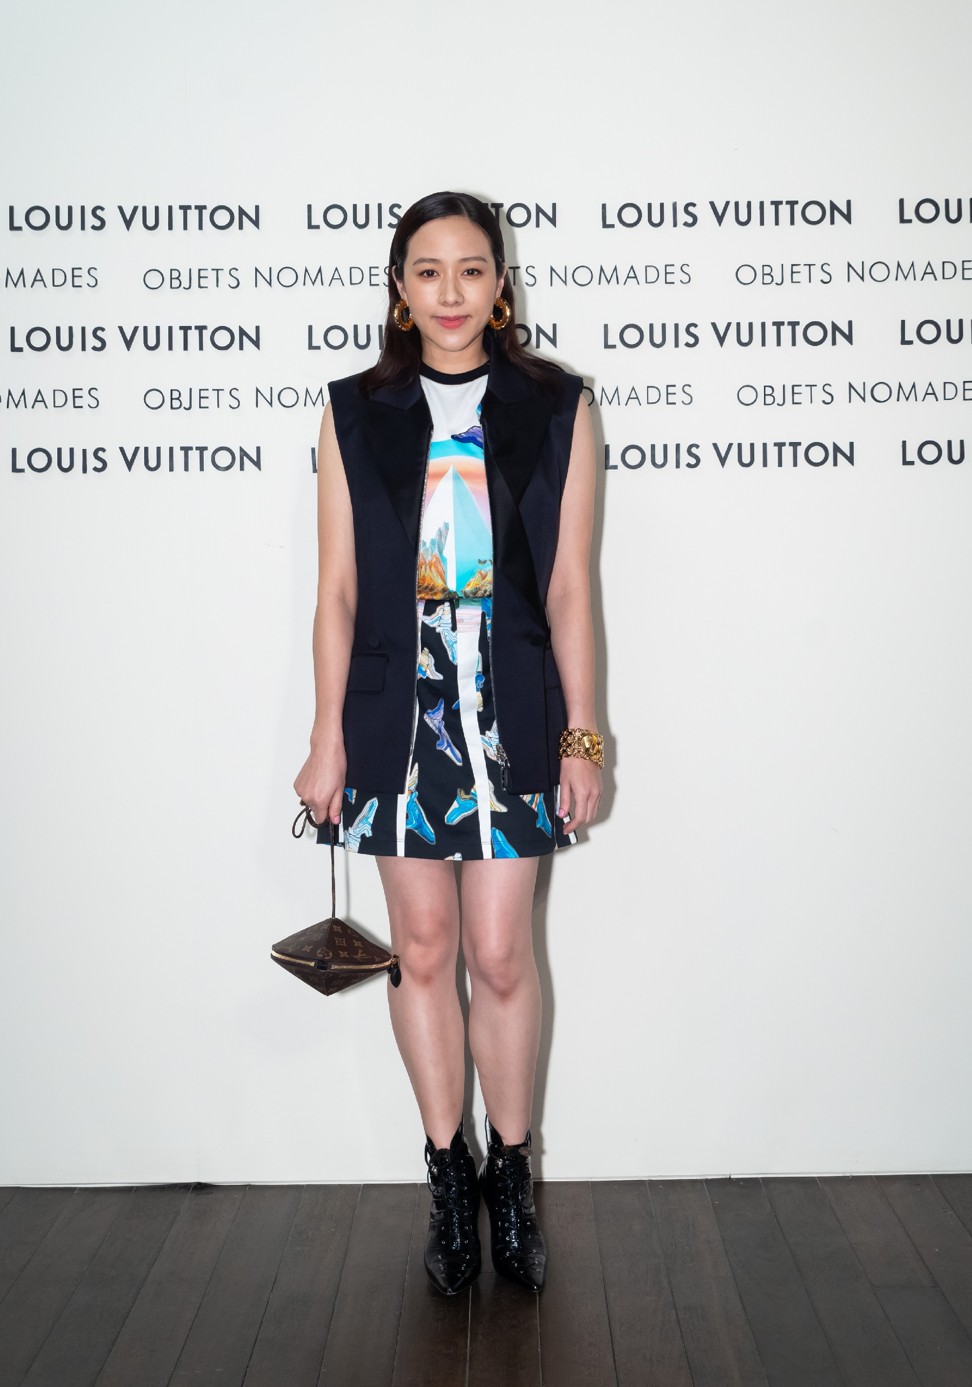 Joyce Wang on Designing Louis Vuitton's Objets Nomades Exhibition